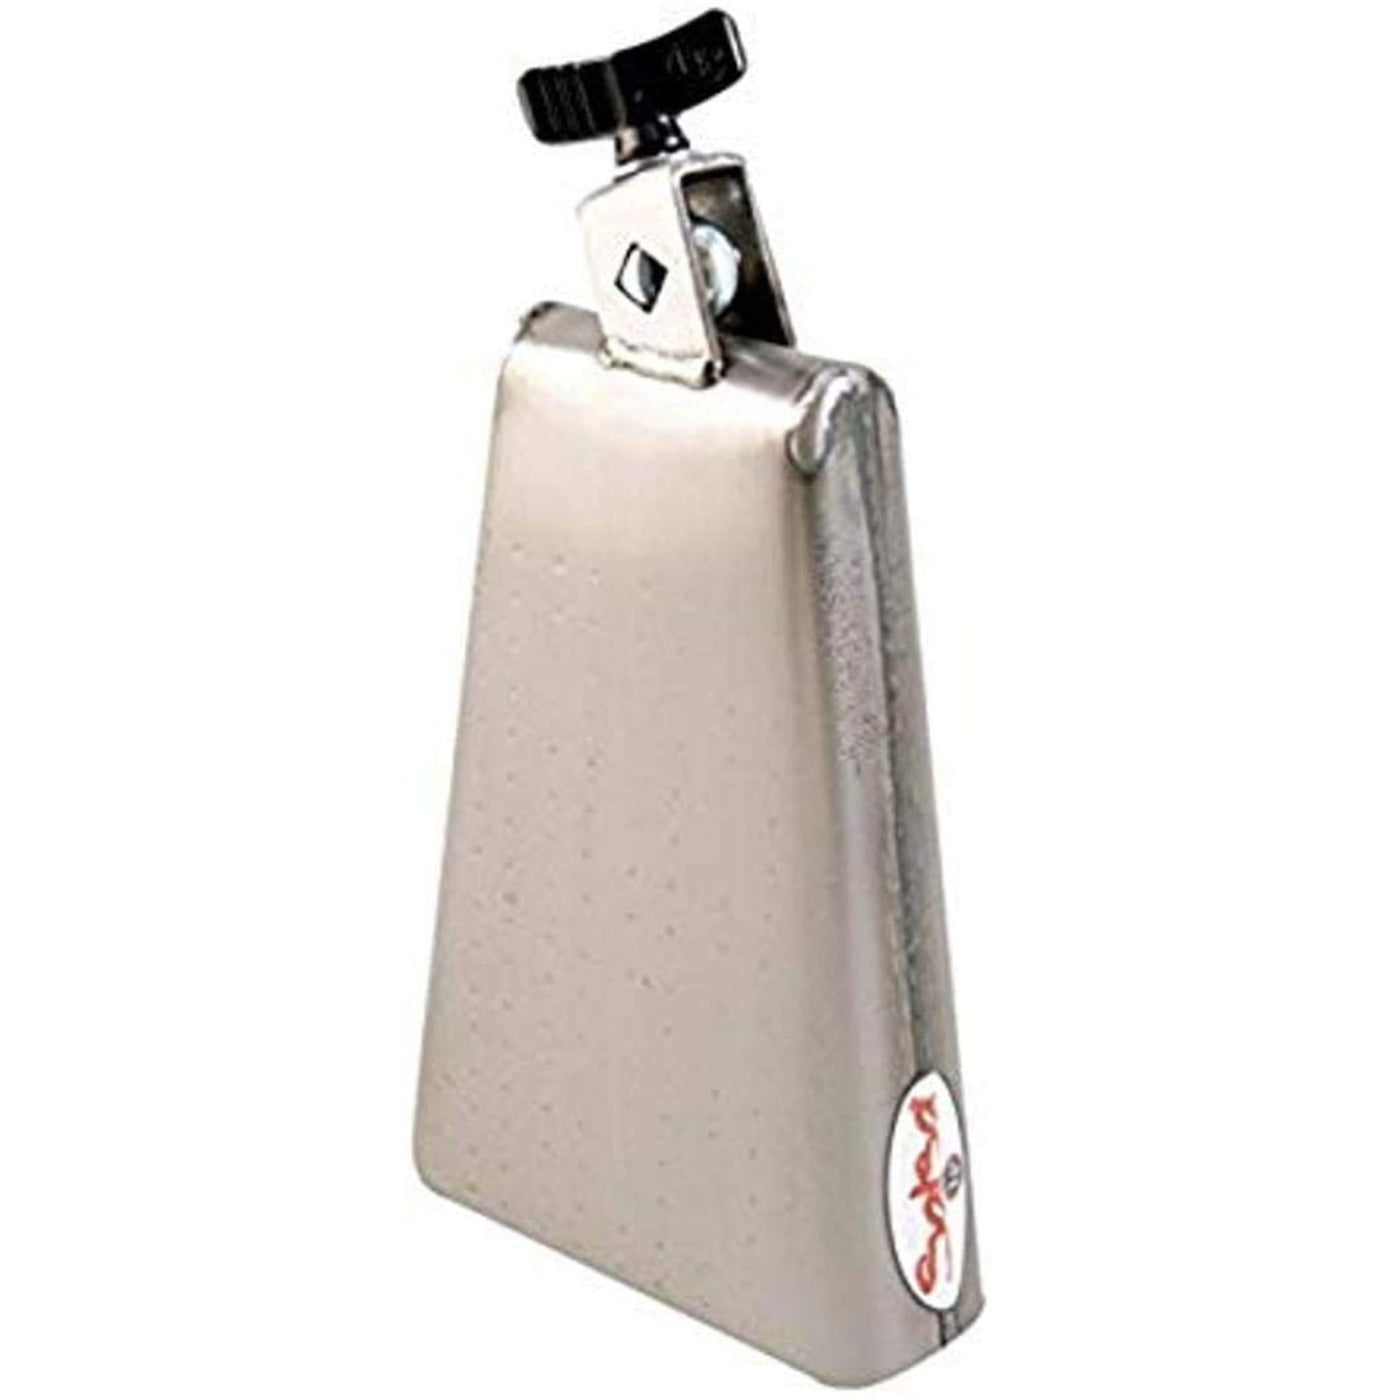 Latin Percussion Salsa Timbale Cowbell (ES-5)